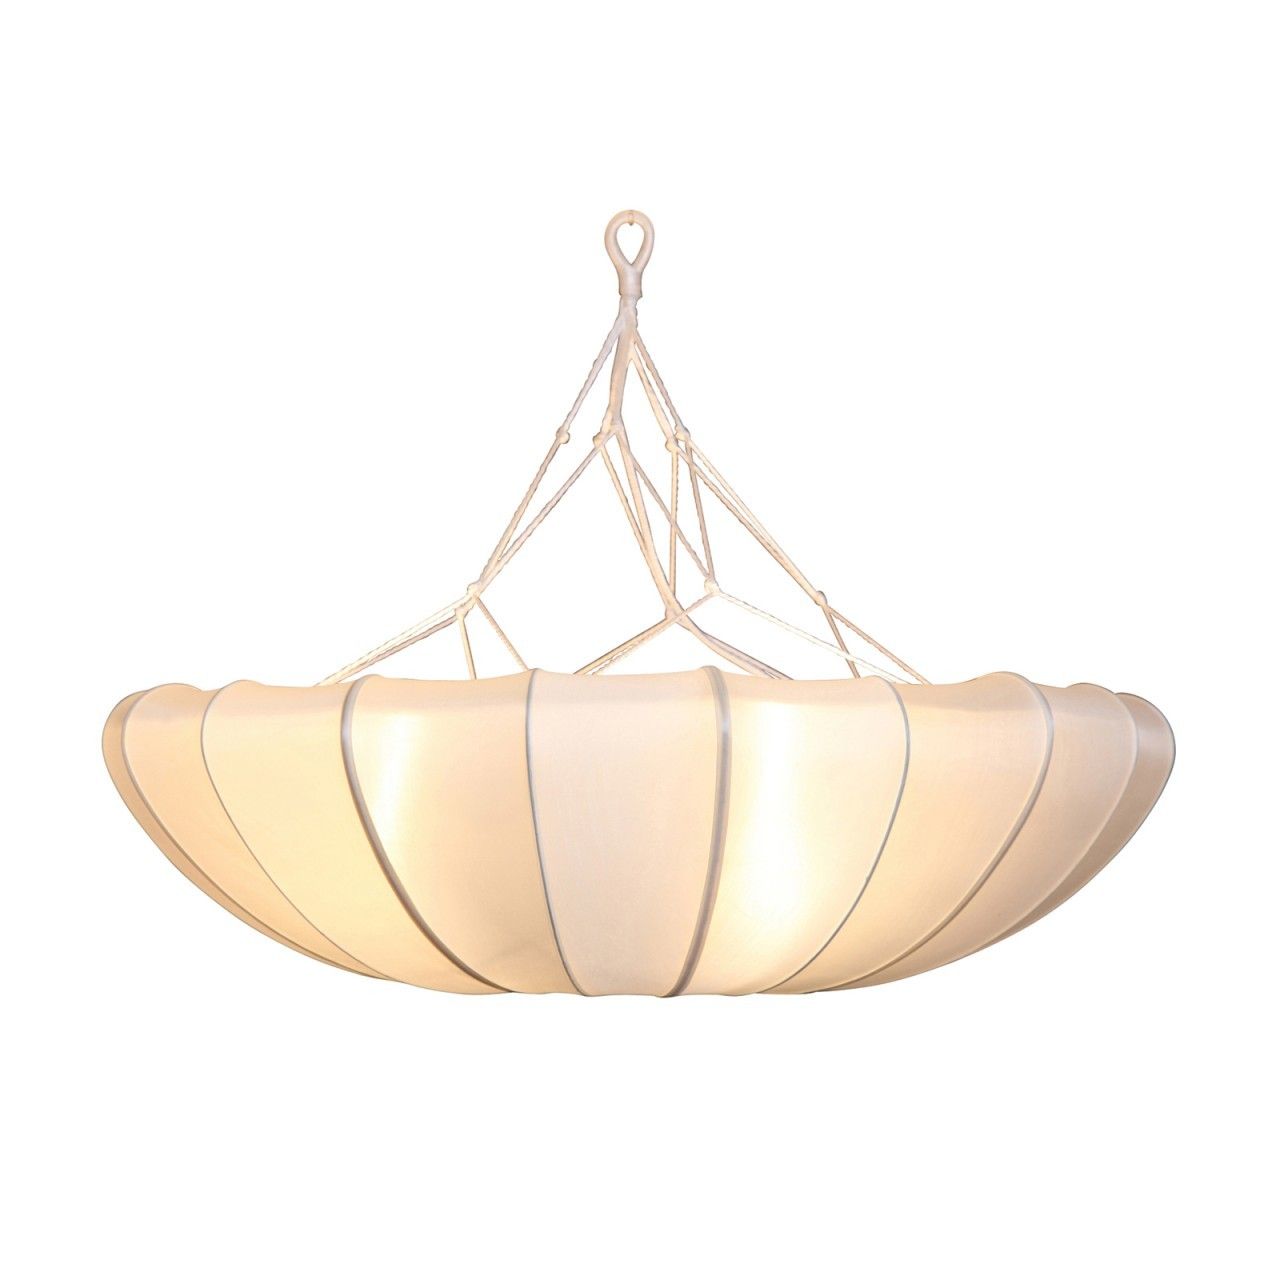 Lamps Online Shopping Illuminate Your Space with Stylish and Affordable Lighting Options